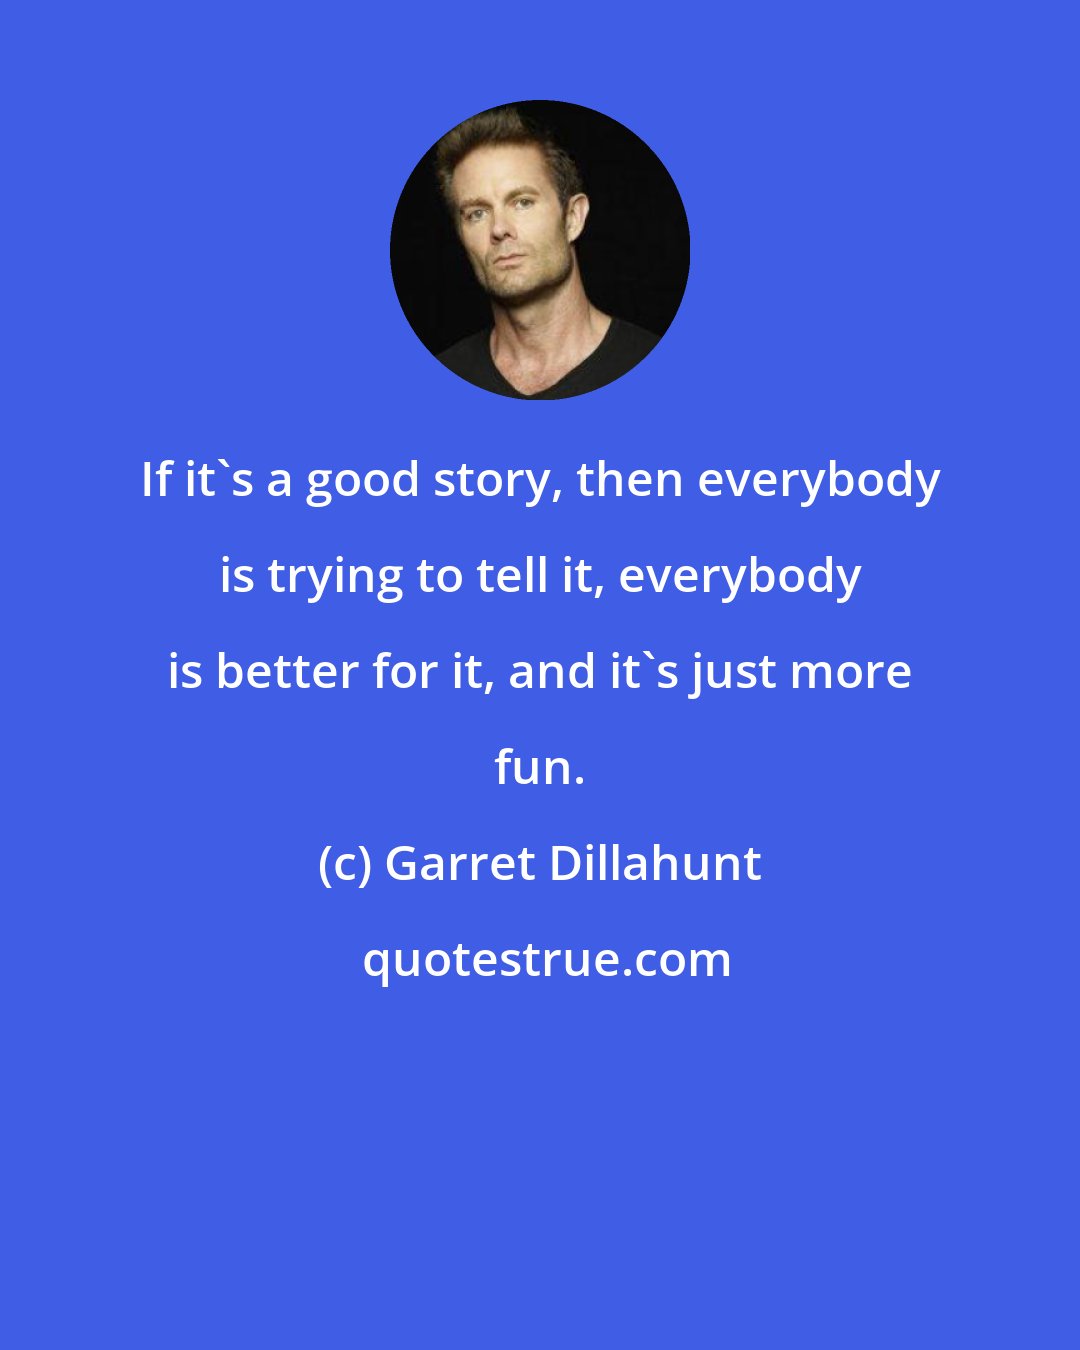 Garret Dillahunt: If it's a good story, then everybody is trying to tell it, everybody is better for it, and it's just more fun.